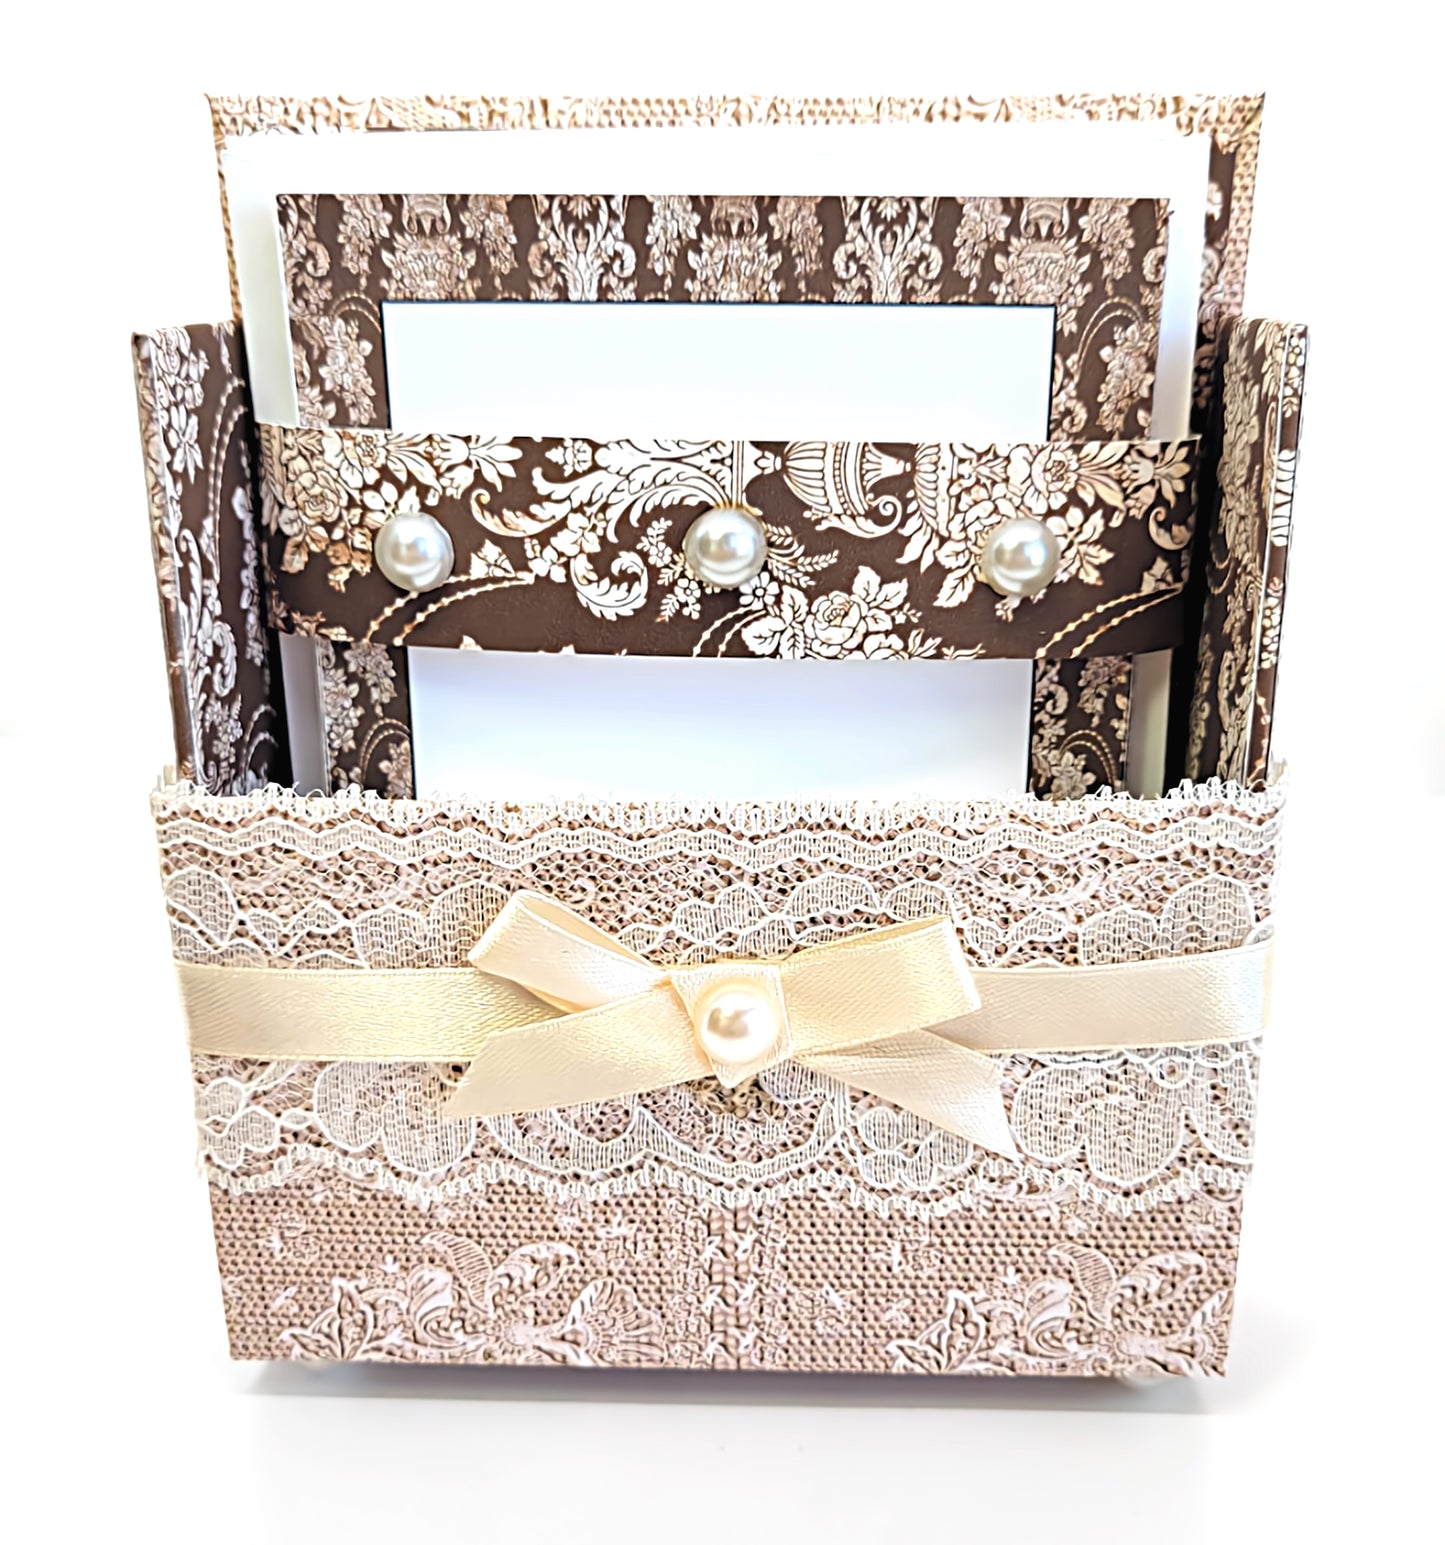 42-Pc Stationery Gift Box Set w/Reusable Desktop Organizer Box and Gold Pen - Ivory & Brown Vintage Lace - Chic Brico